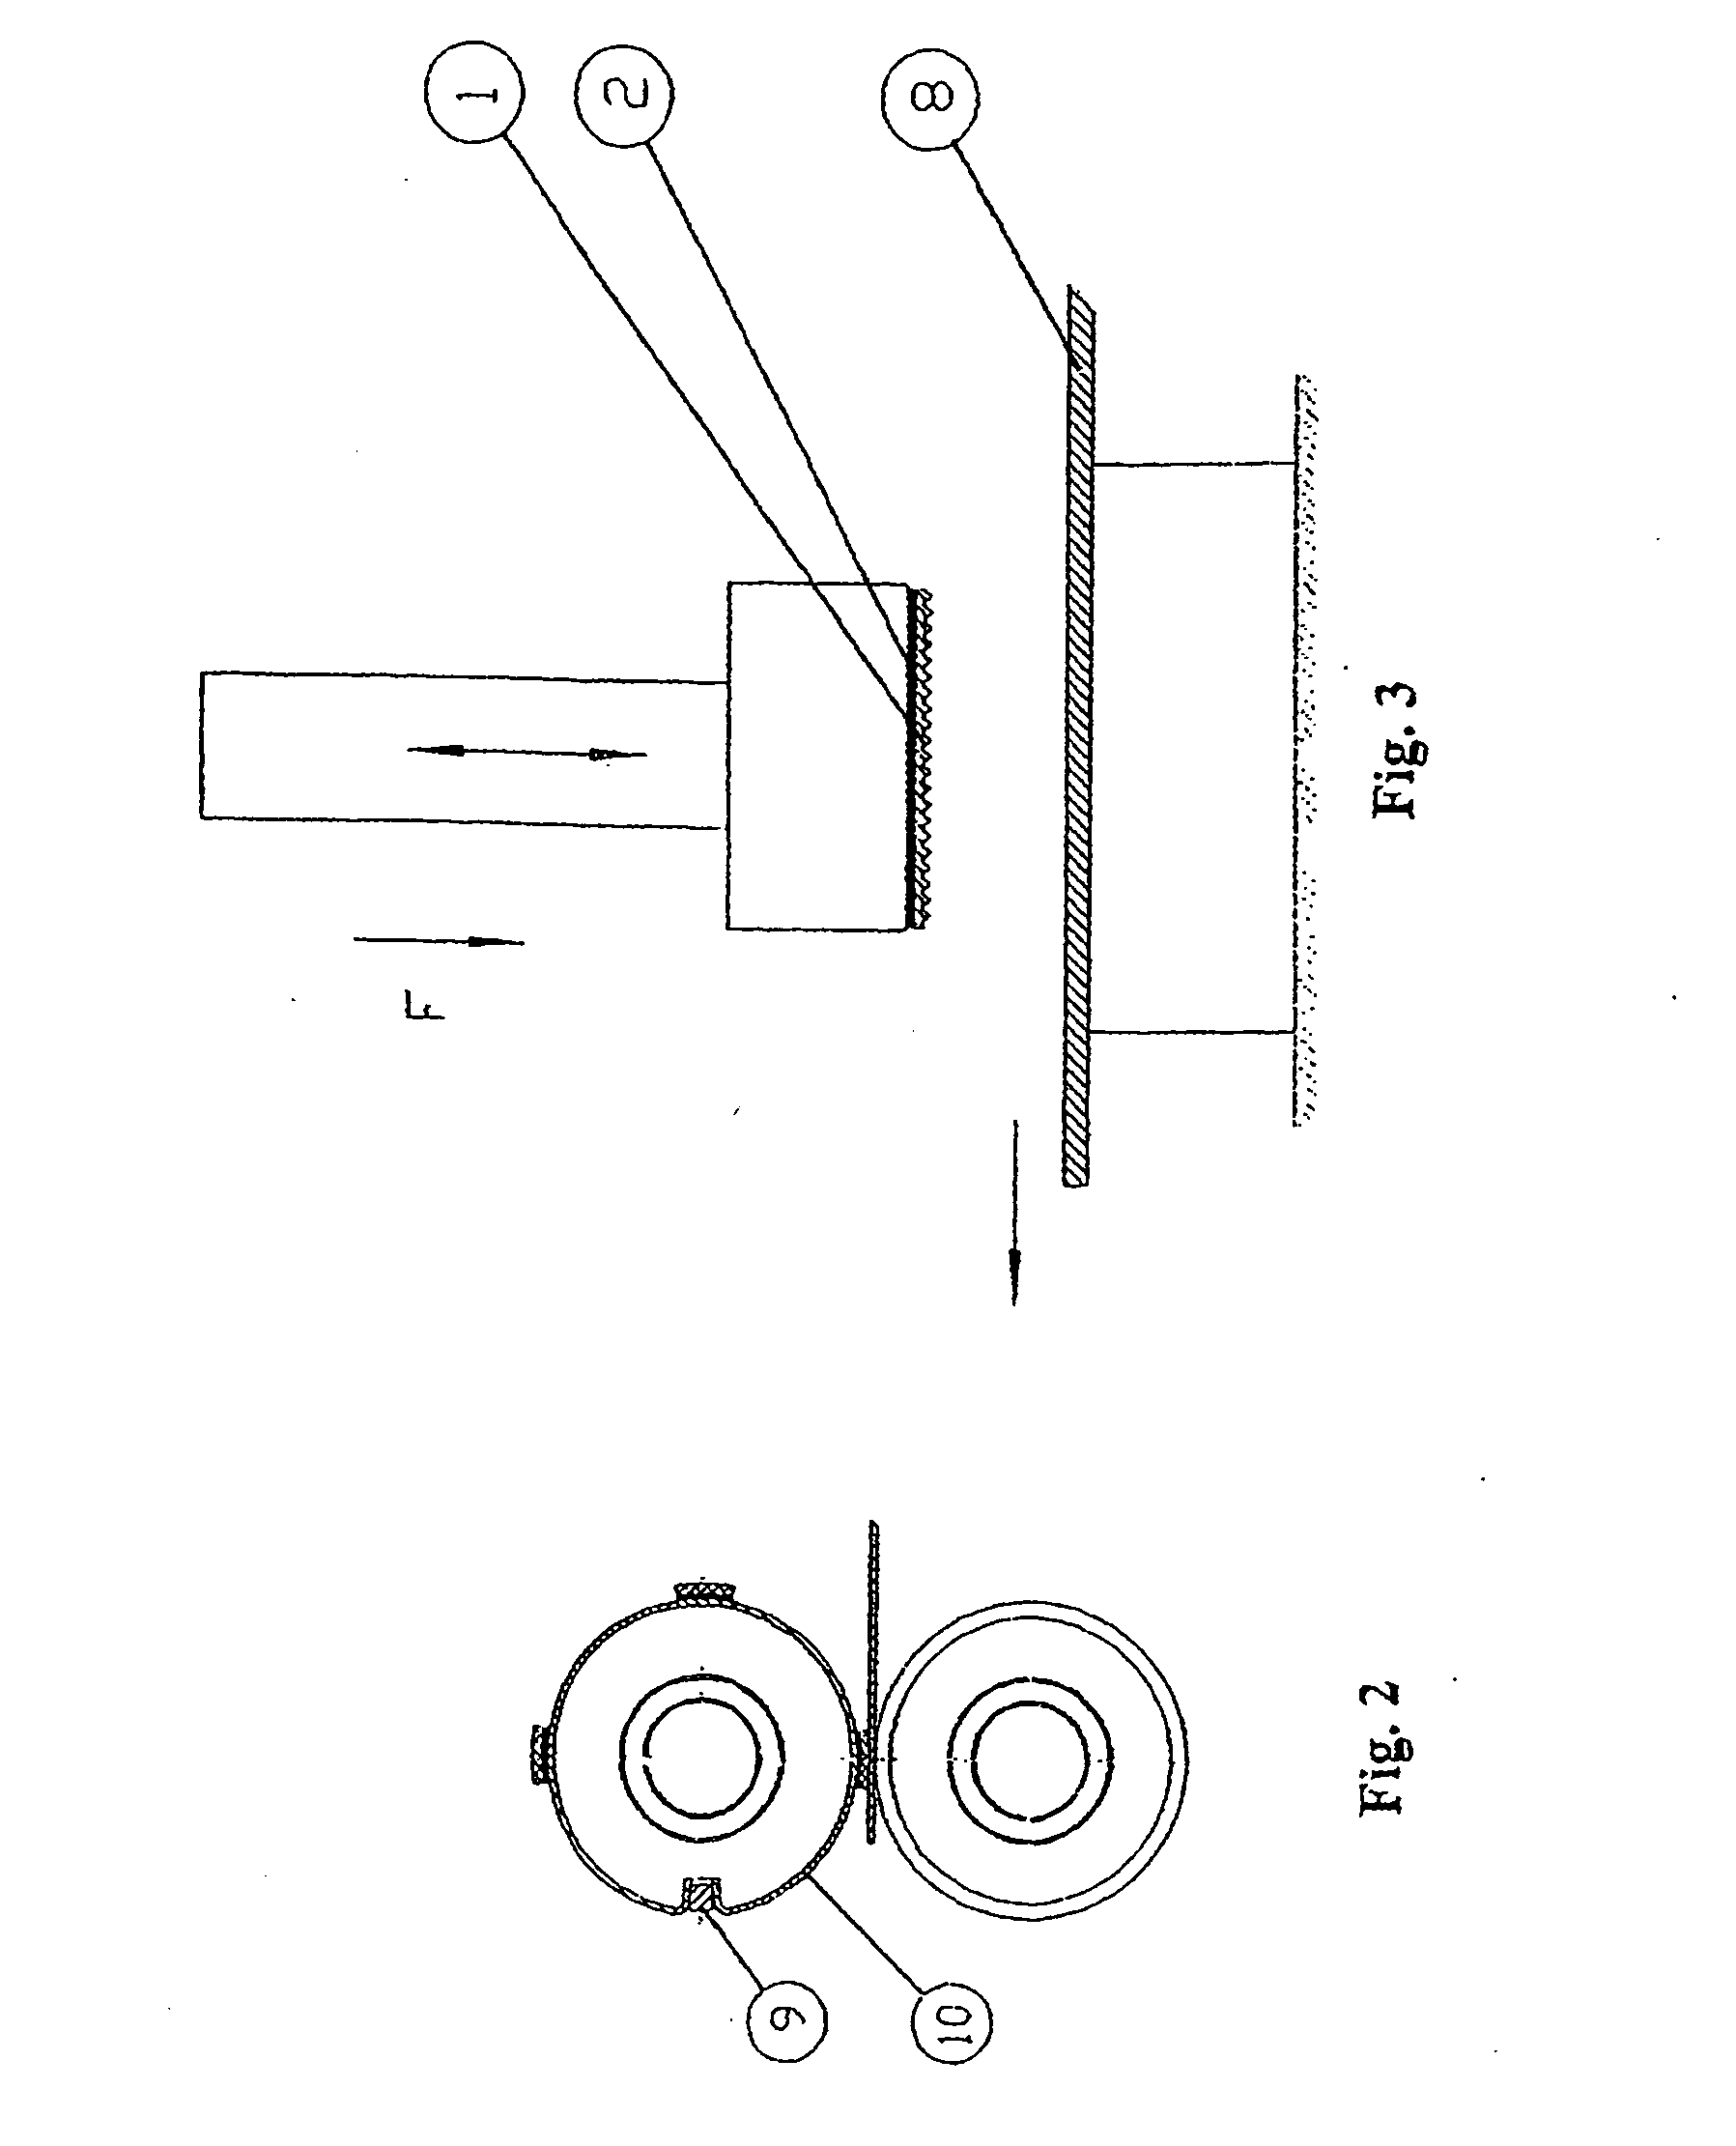 Device for processing a three dimensional structure into a substrate